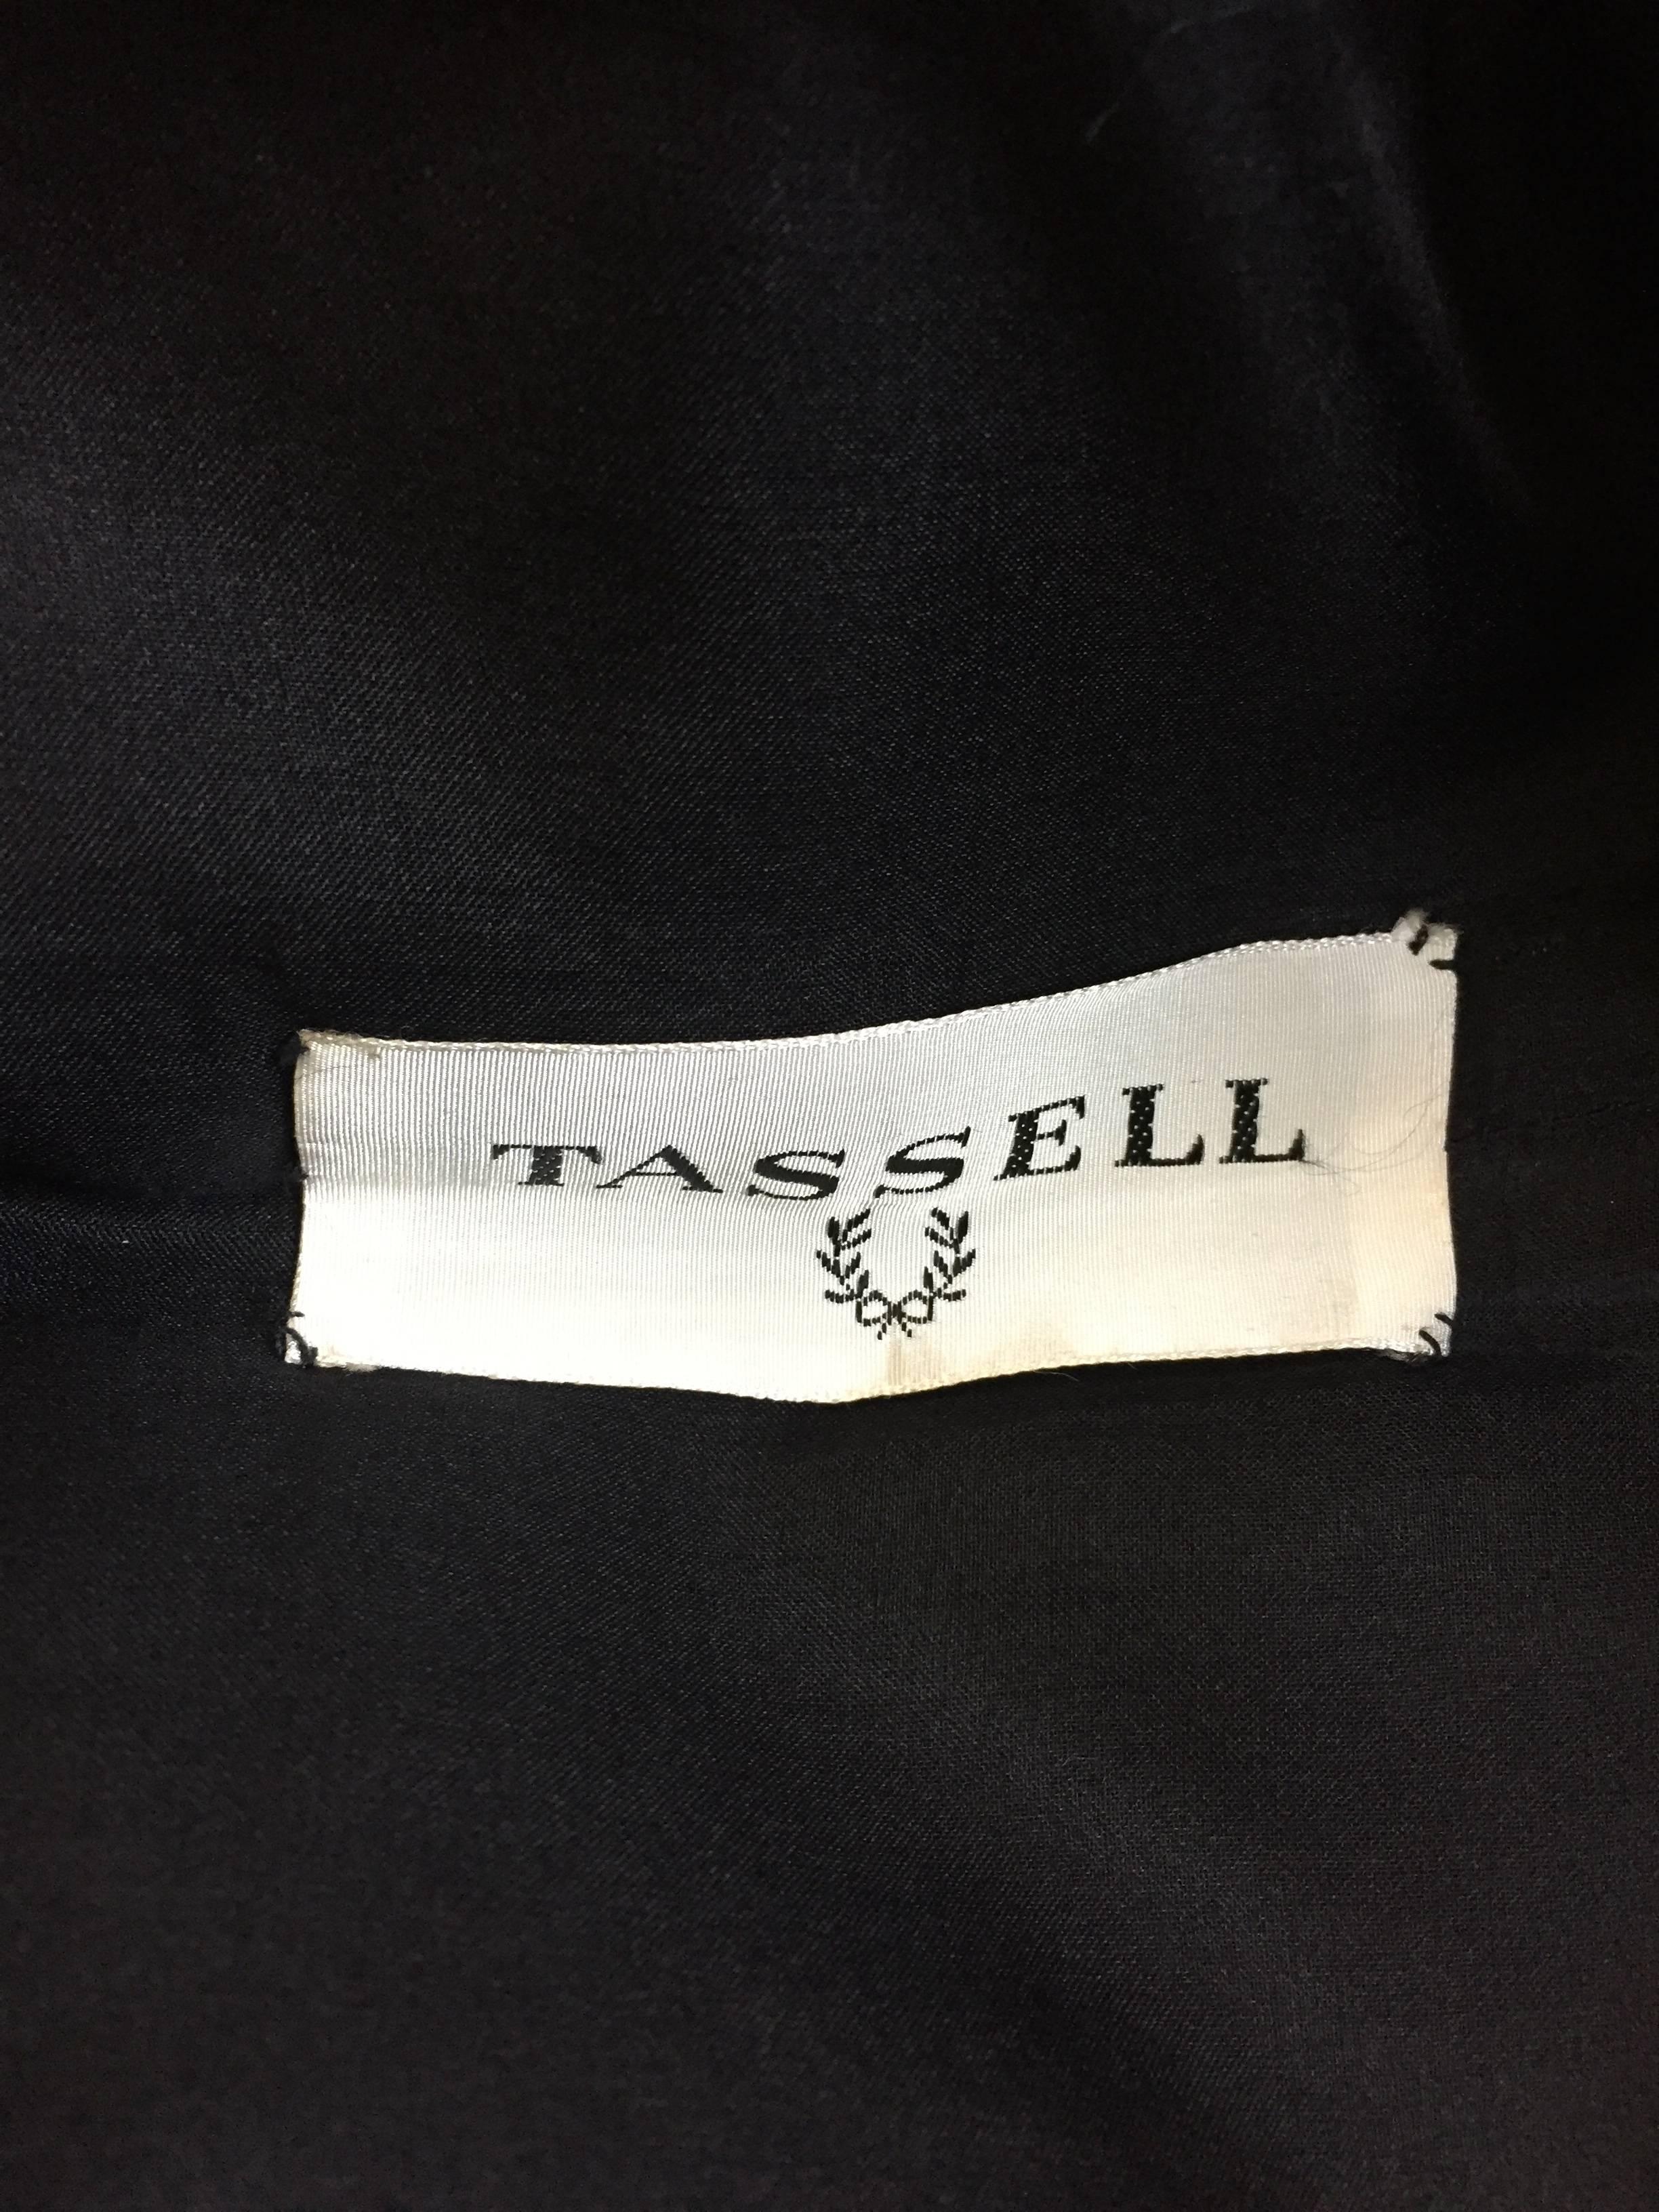 Gustave Tassell 1956 brocade evening dress size 12. For Sale 5